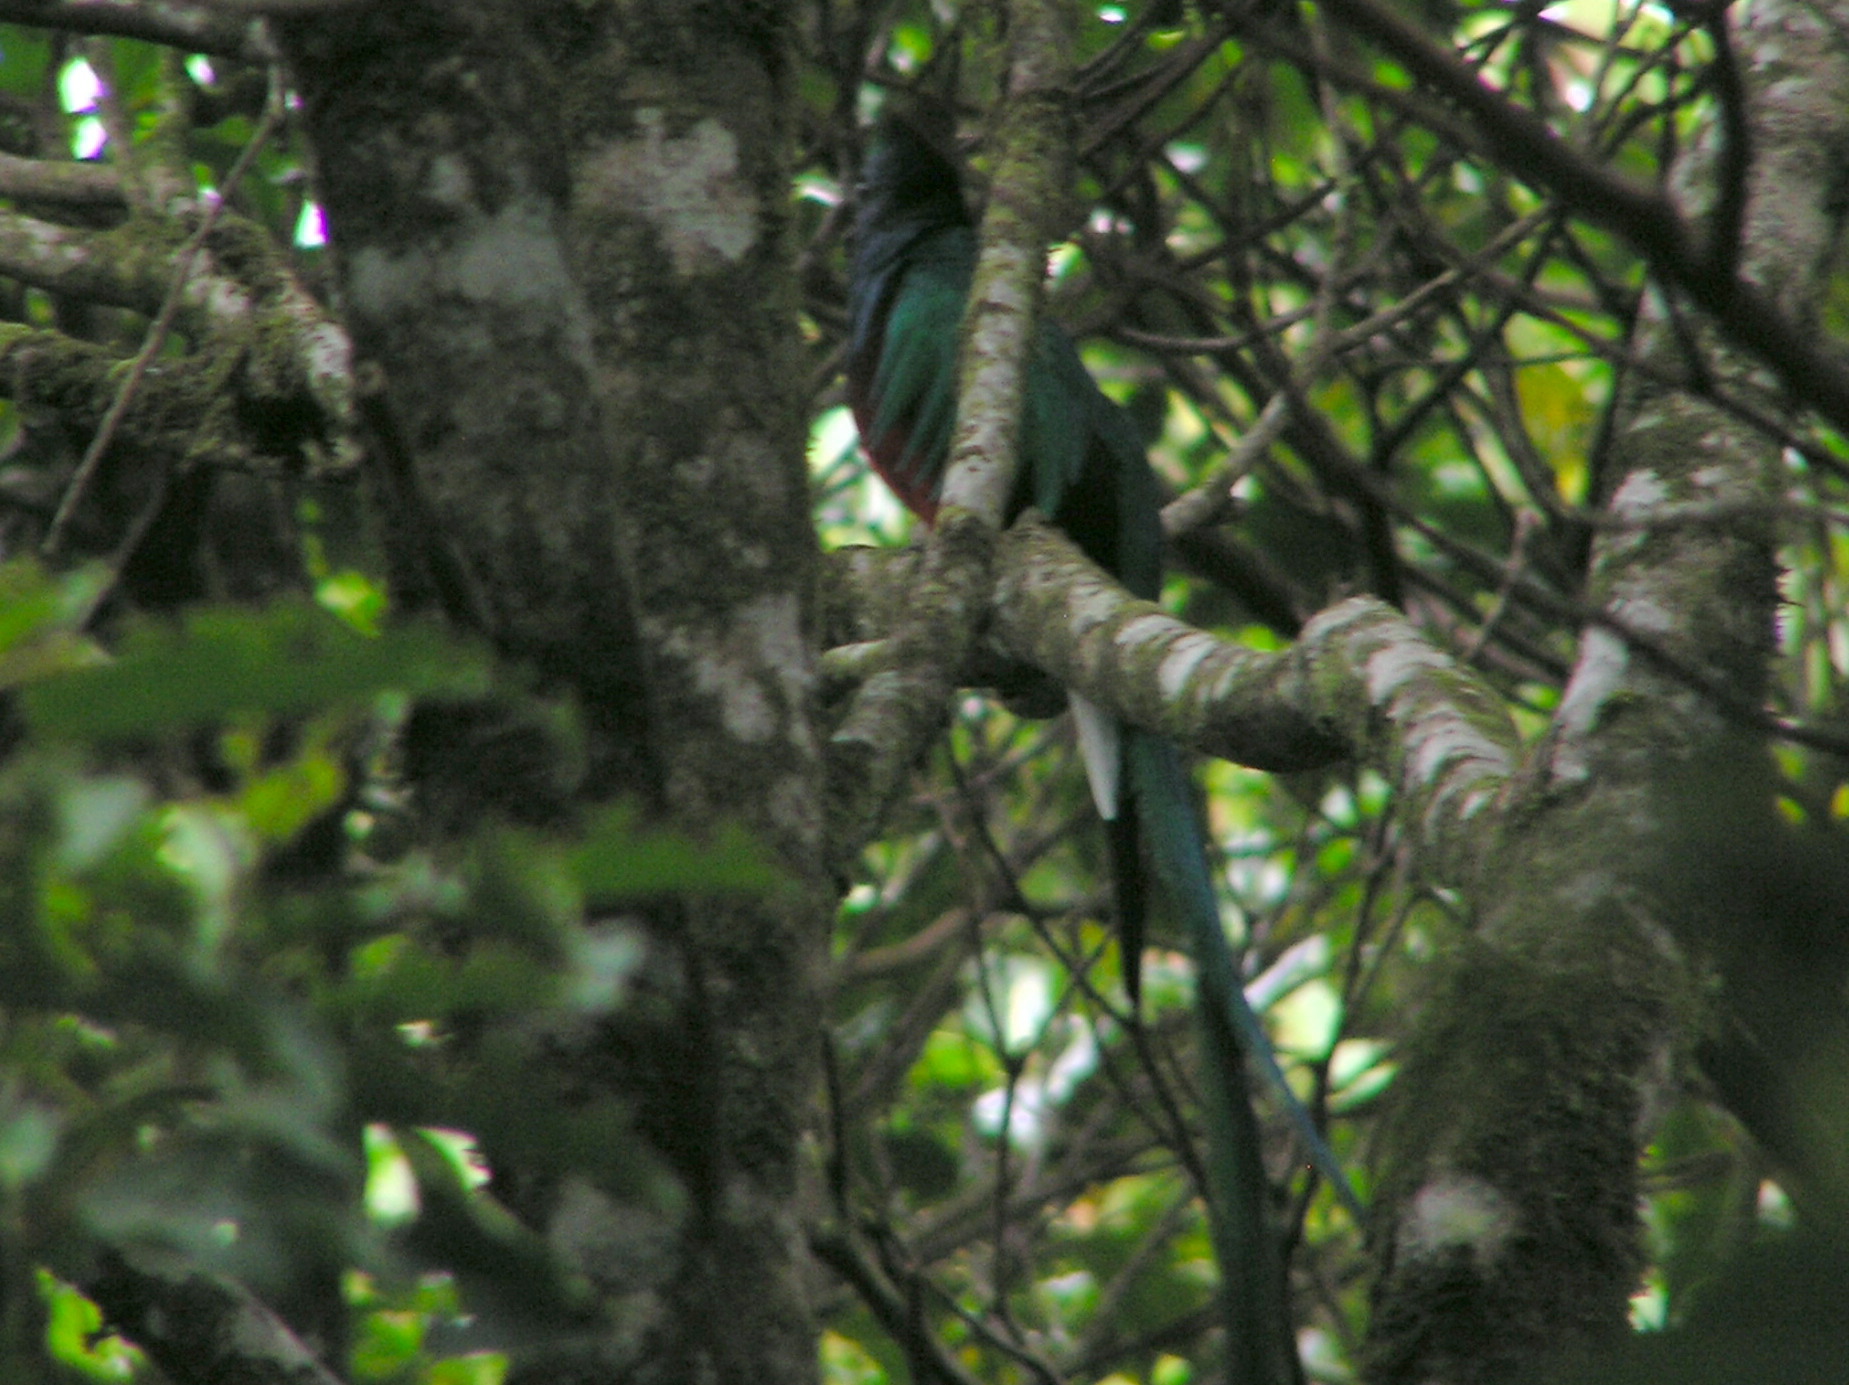 Click picture to see more Resplendent Quetzal photos.